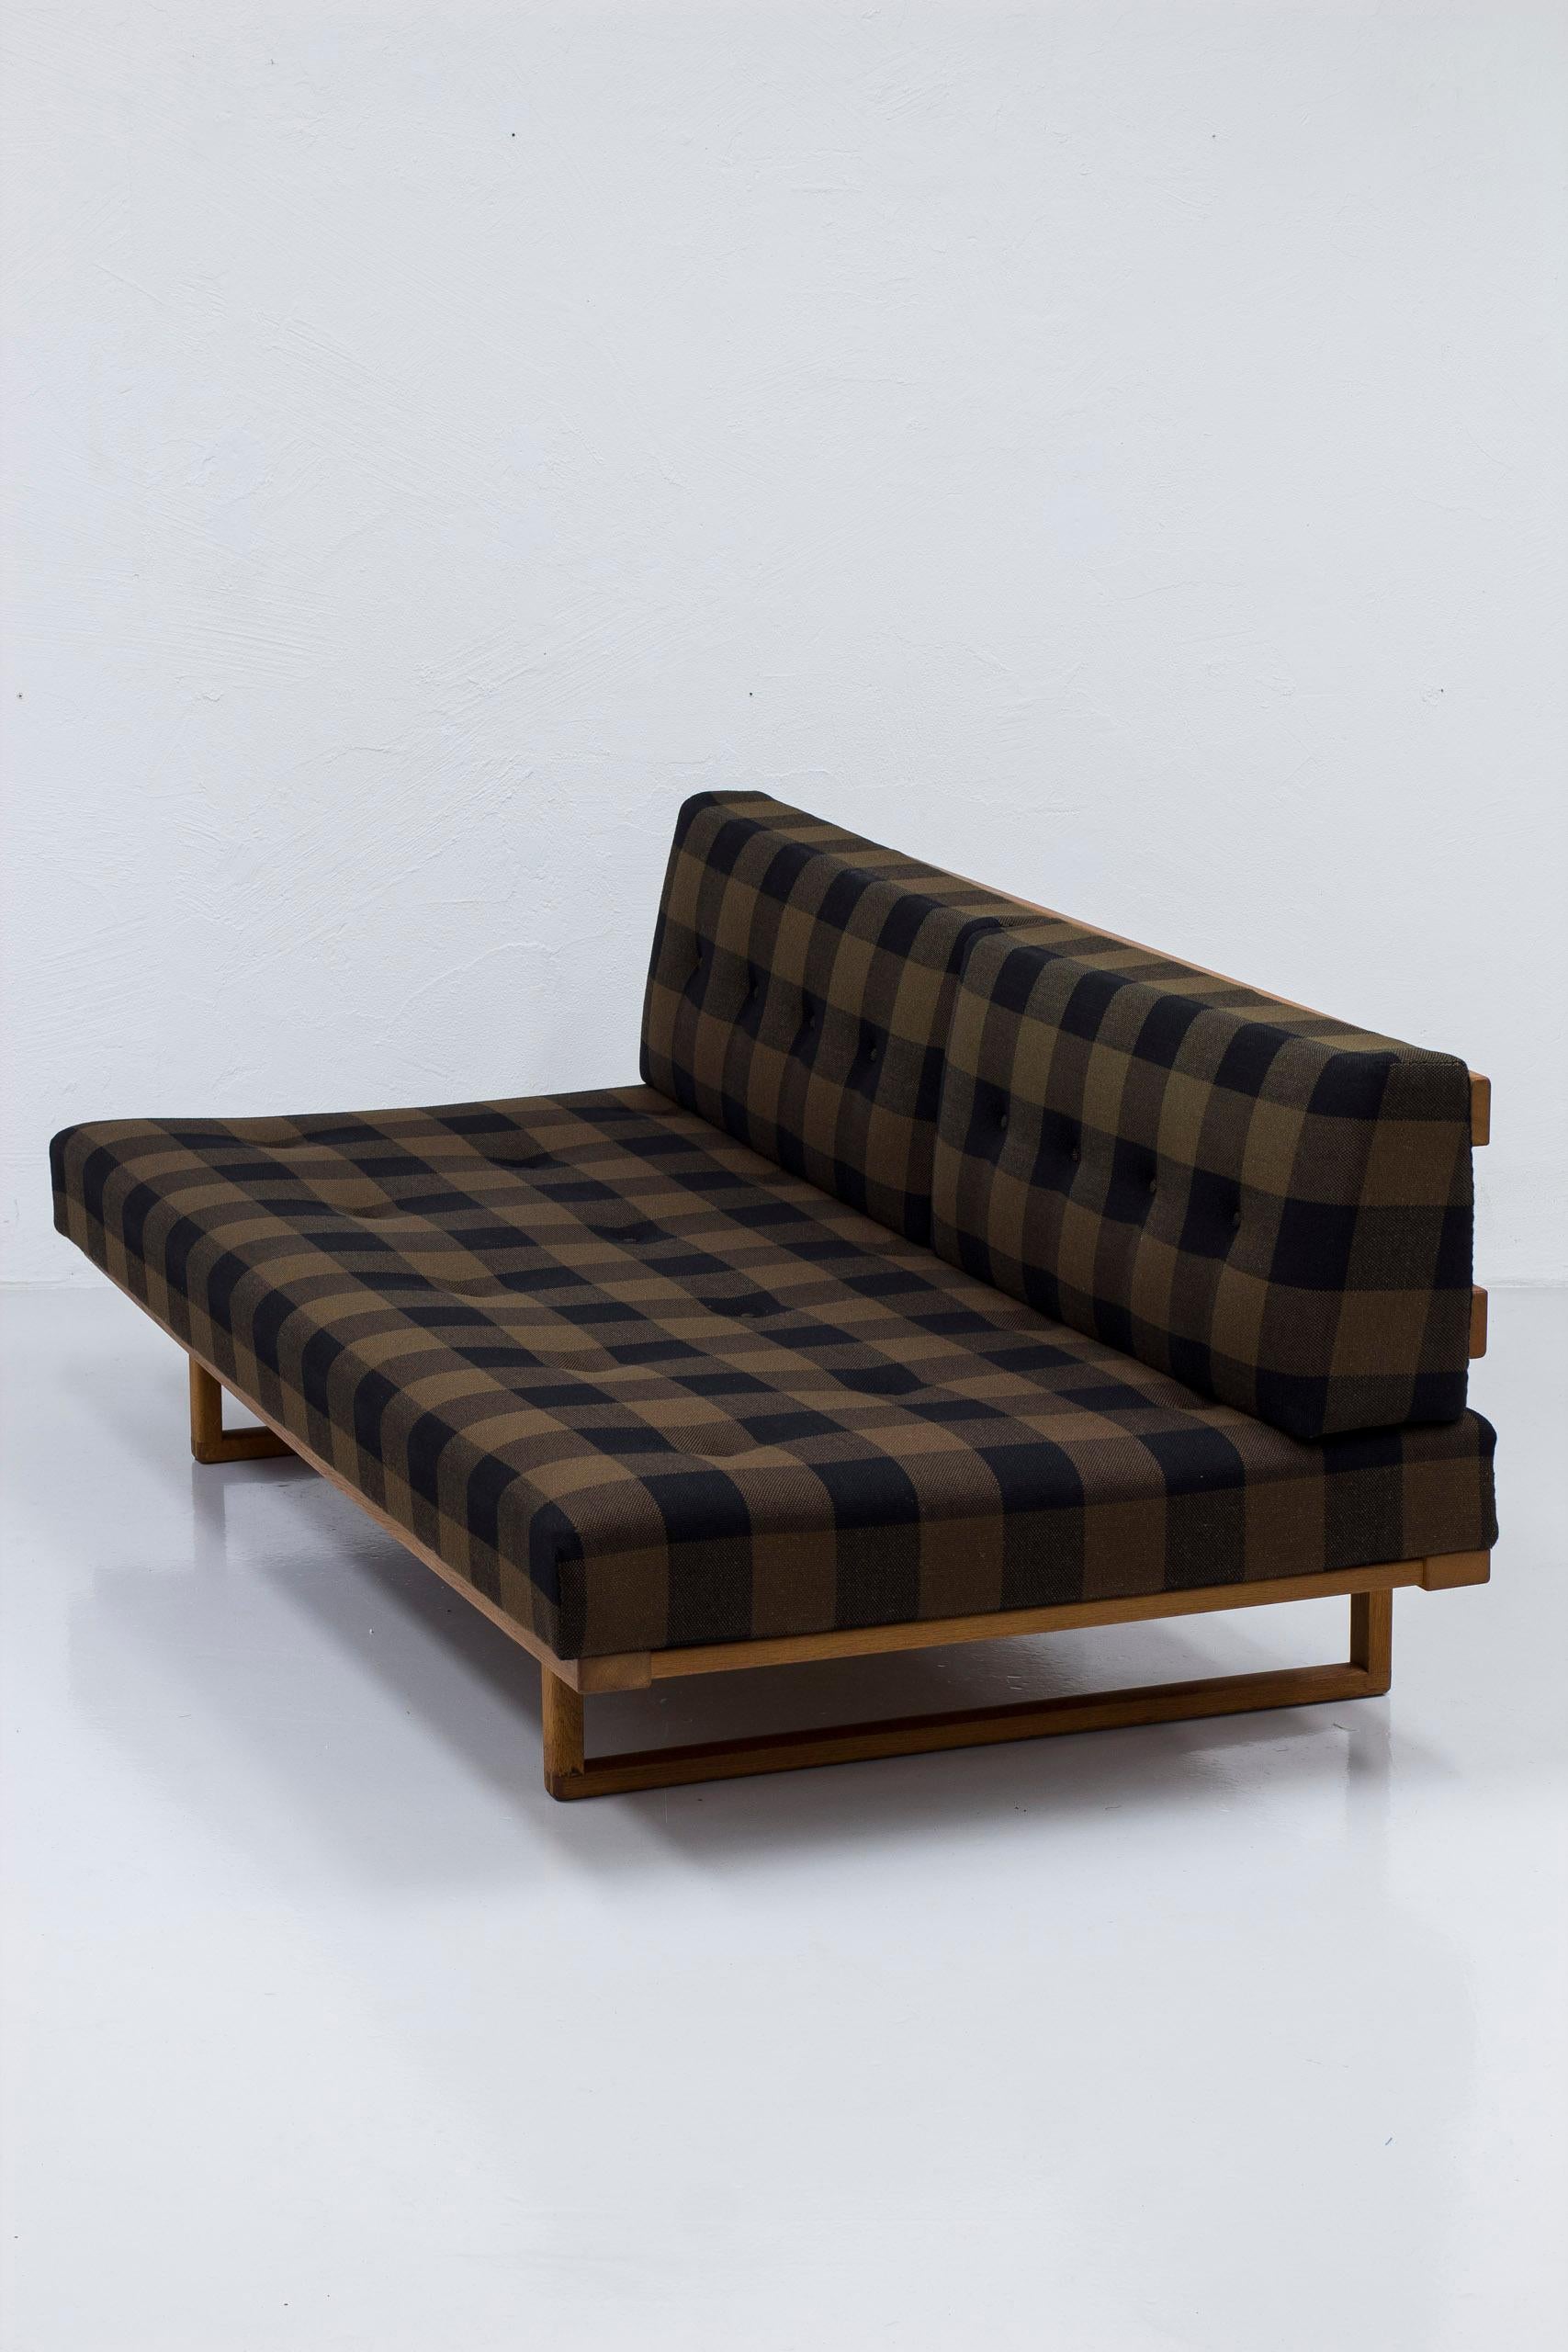 Sofa/daybed model 4312 designed by Børge Mogensen. produced by Fredericia Stolefabrik in Denmark during the 1960s. Solid oak and ash frame with brass hardware and original spring mattress and cushions. The daybed has its original cotil wool fabric